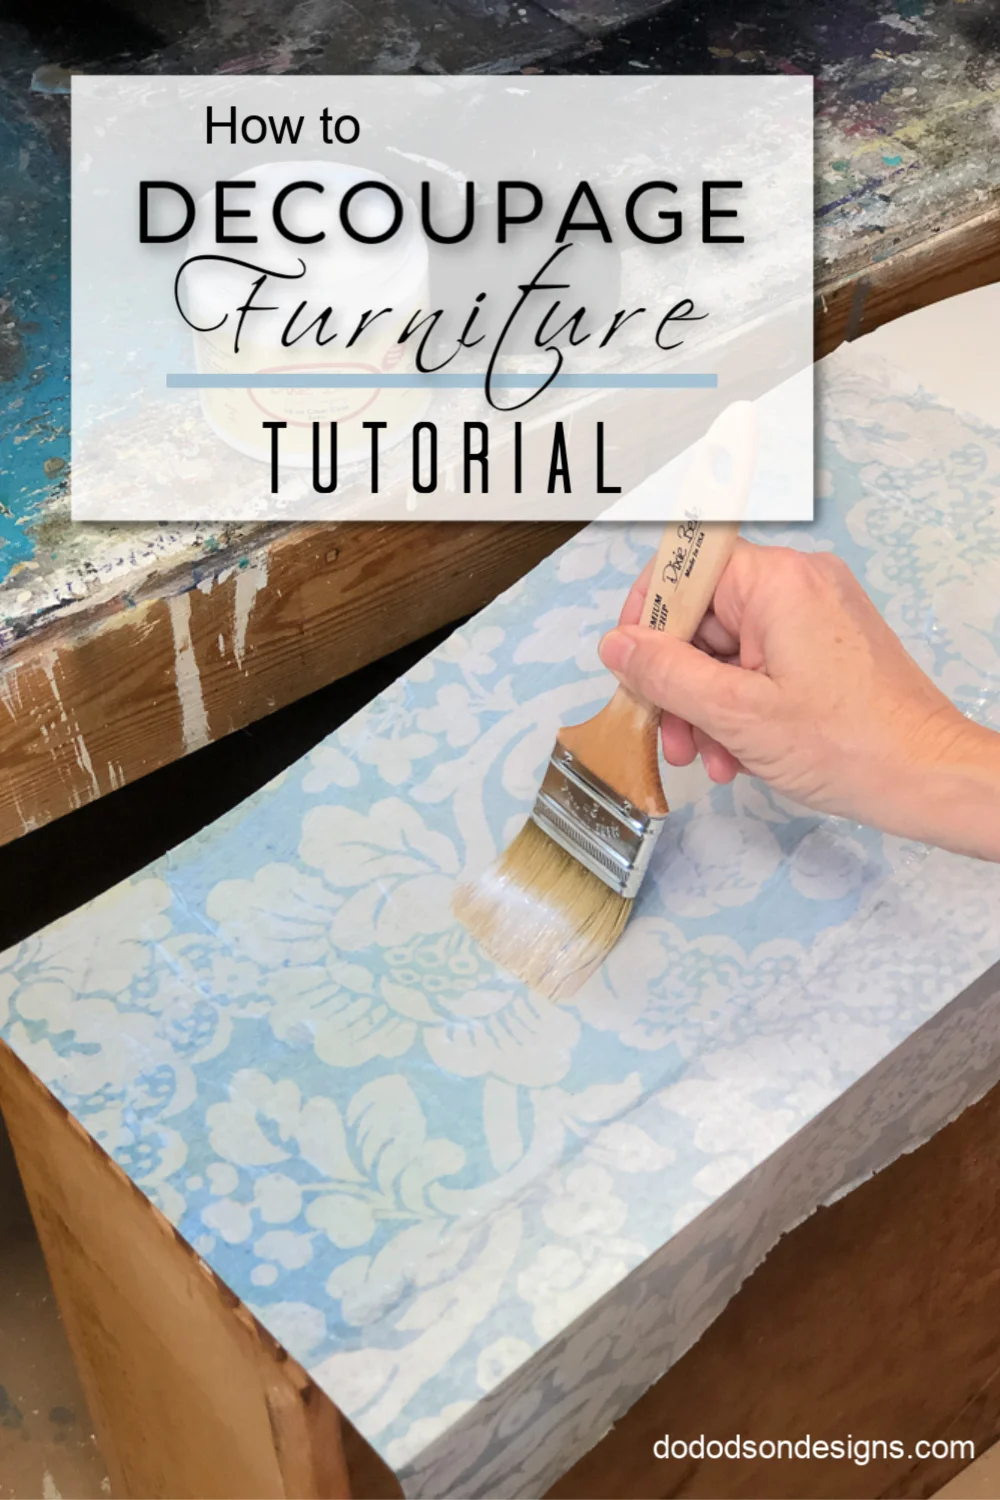 How To Decoupage Furniture | Tutorial